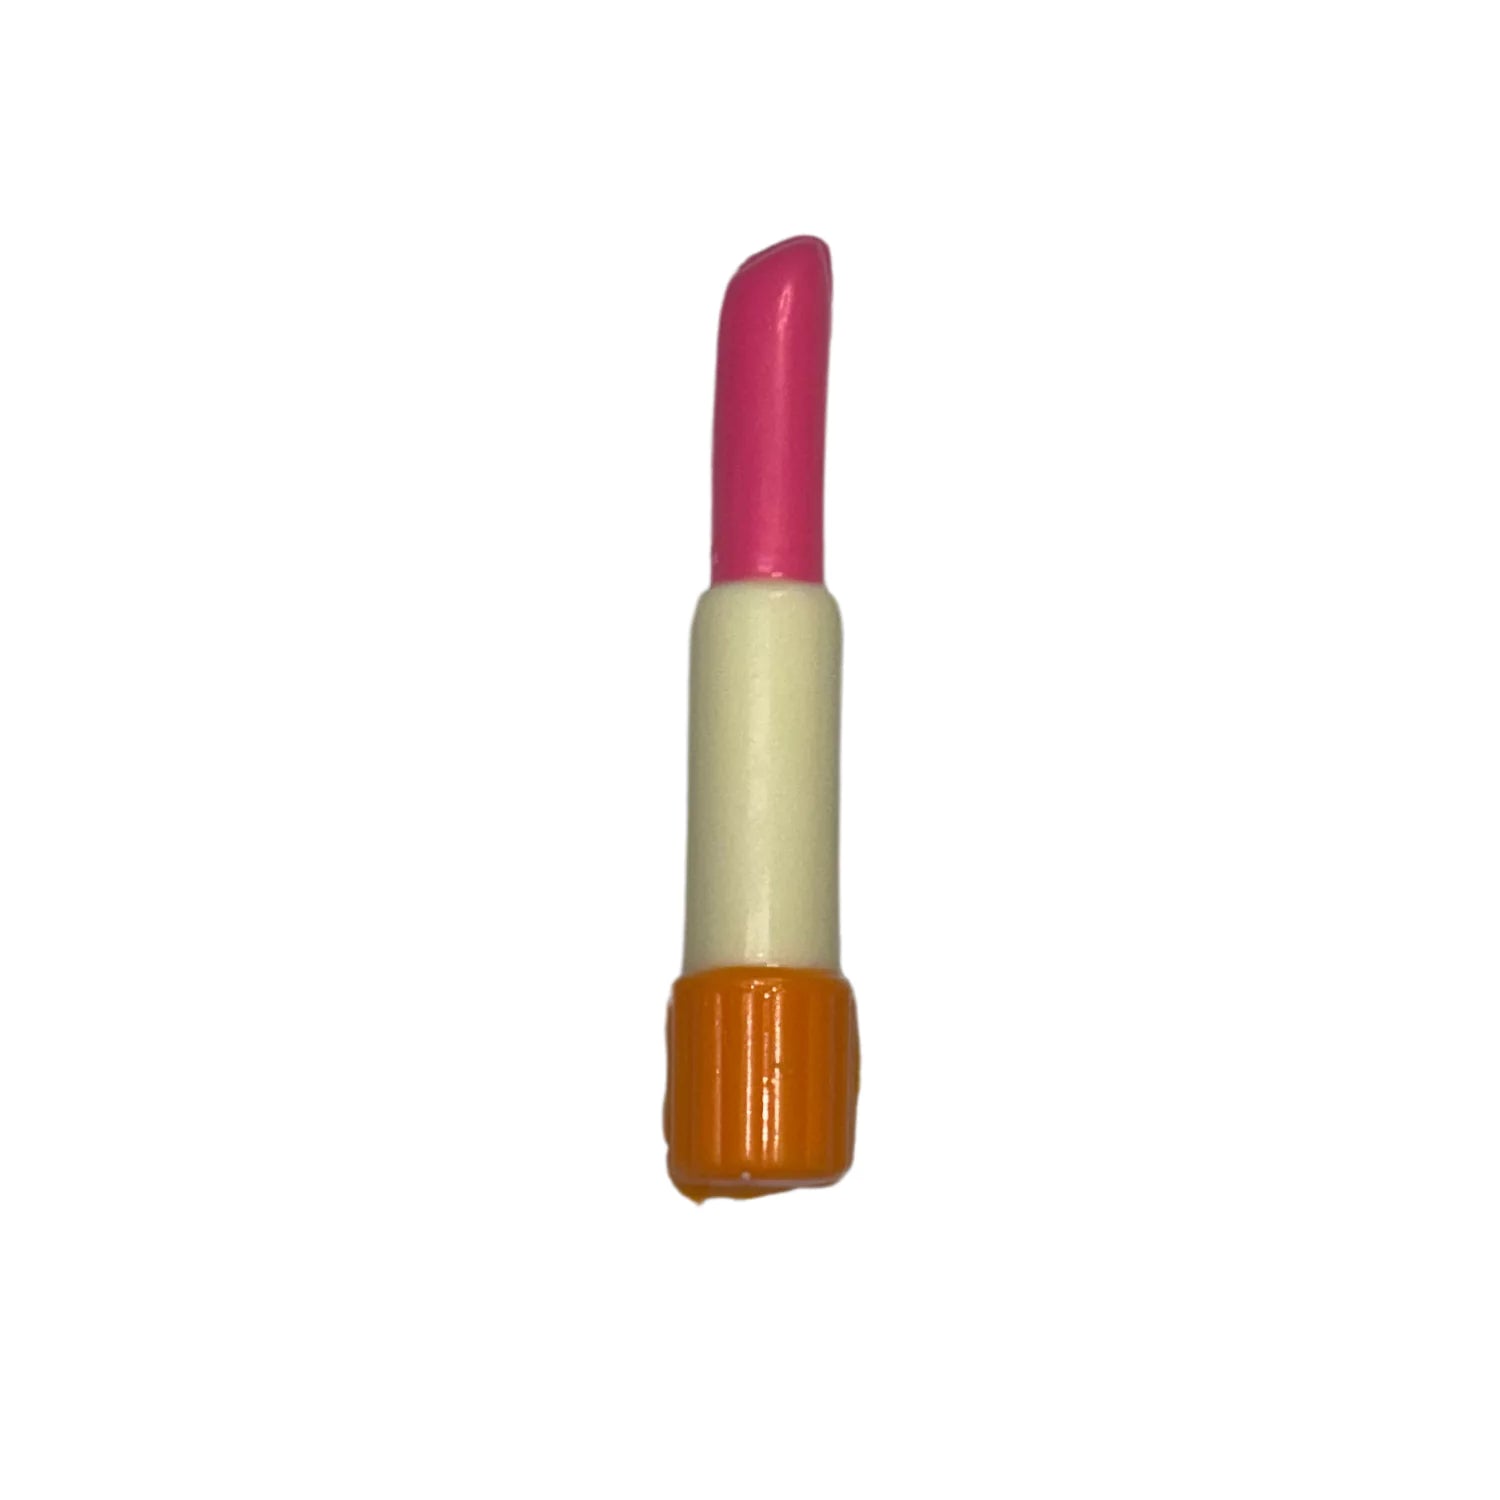 Assorted Colors Lipstick White and Chocolate Milk Chocolate 0.4 oz each Candy Hot Pink White Chocolate